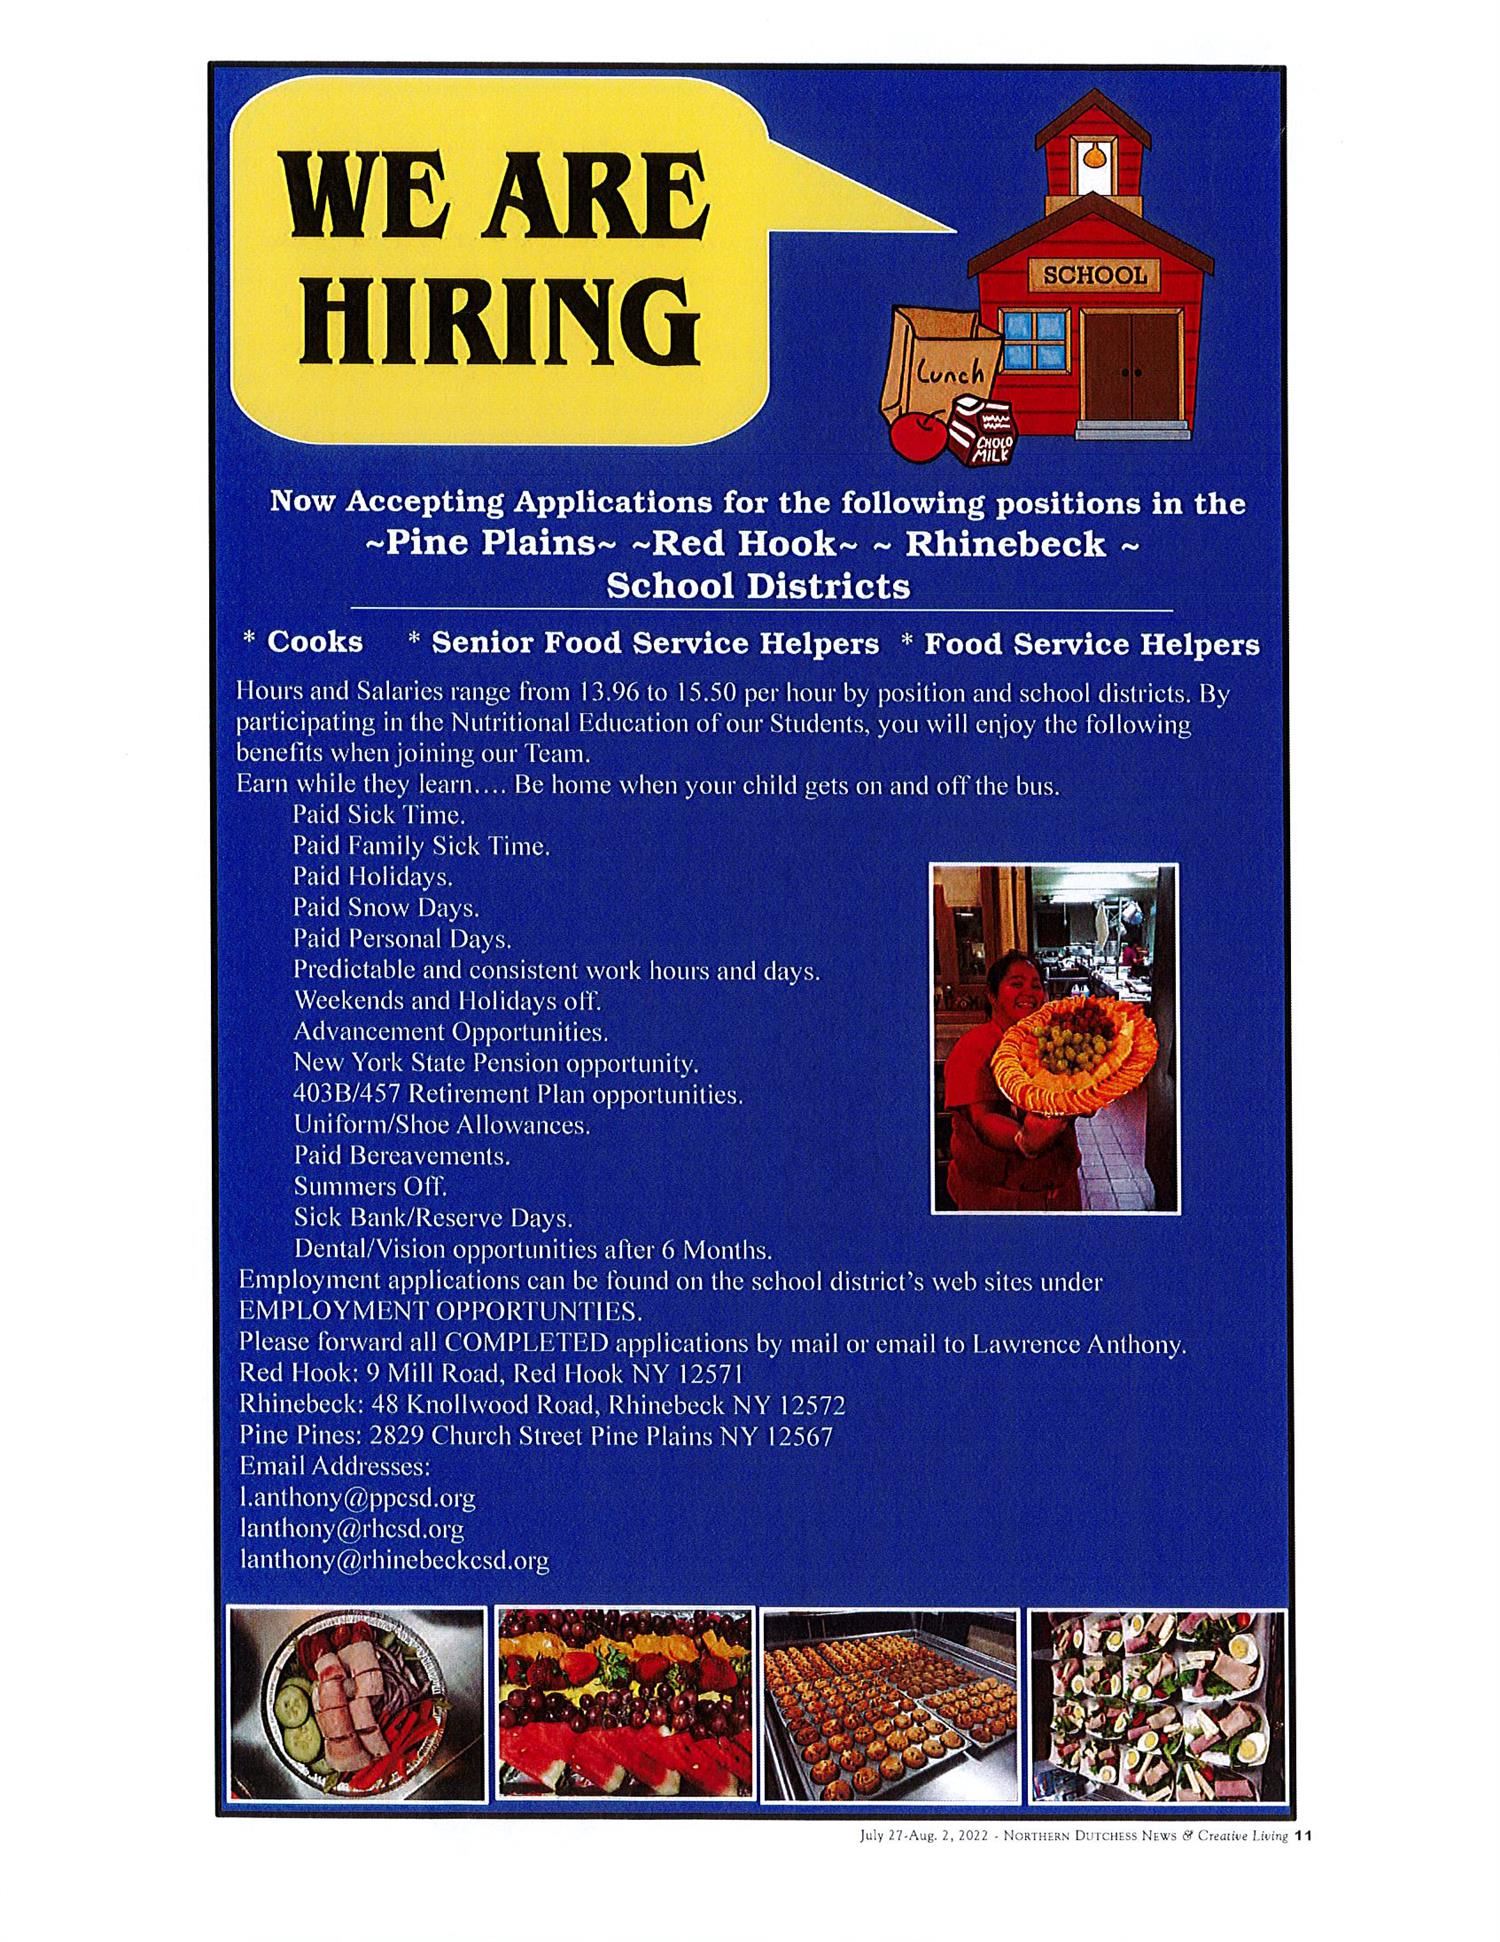  Food Services is hiring cooks and food service helpers